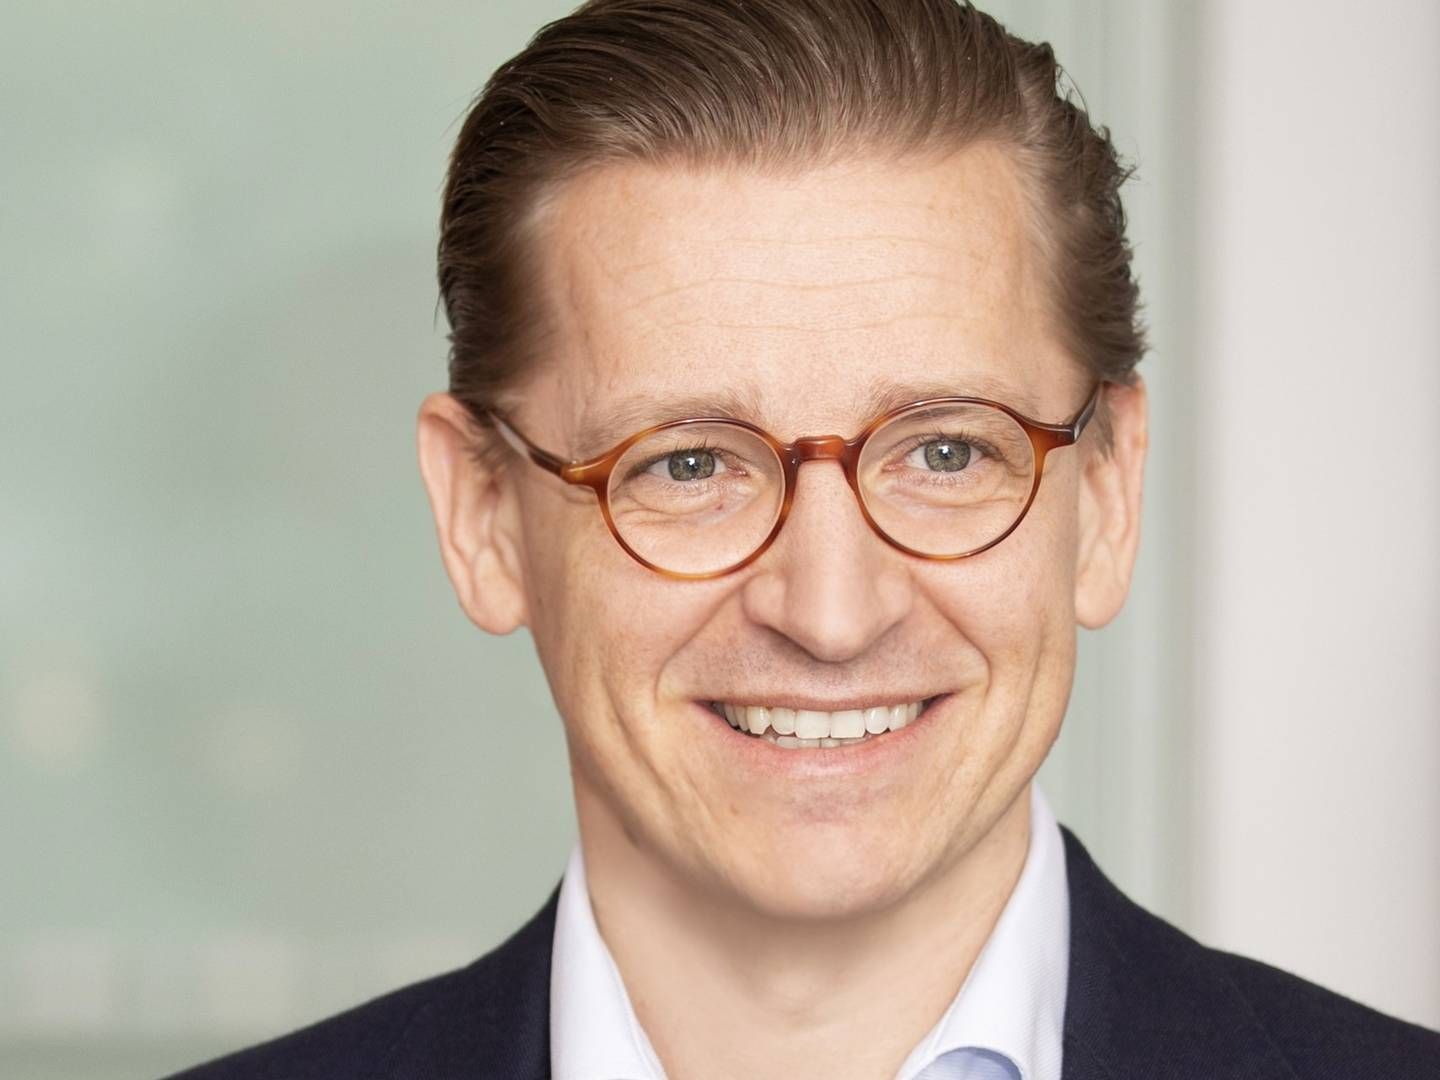 "We made a strategic decision last year. We wanted to gain control of the companies. They are important to us and they have an interesting future," says Christian Rychly, managing director - shipping, MPC Capital, about the merger of Harper Petersen and Albis Shipping & Transport. | Photo: MPC Capital